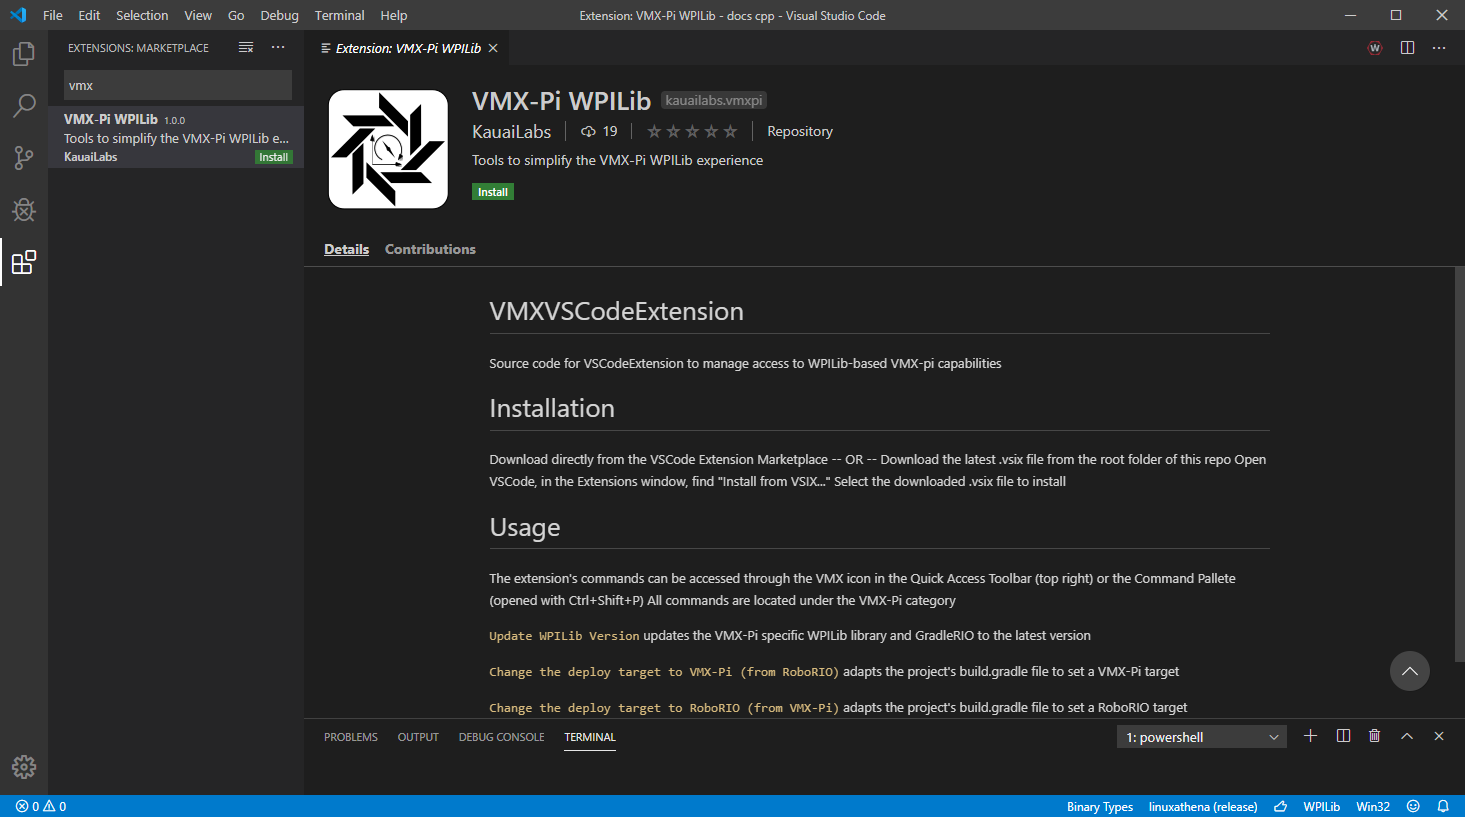 ../../../_images/configuring-the-project-for-vmxpi-3.png